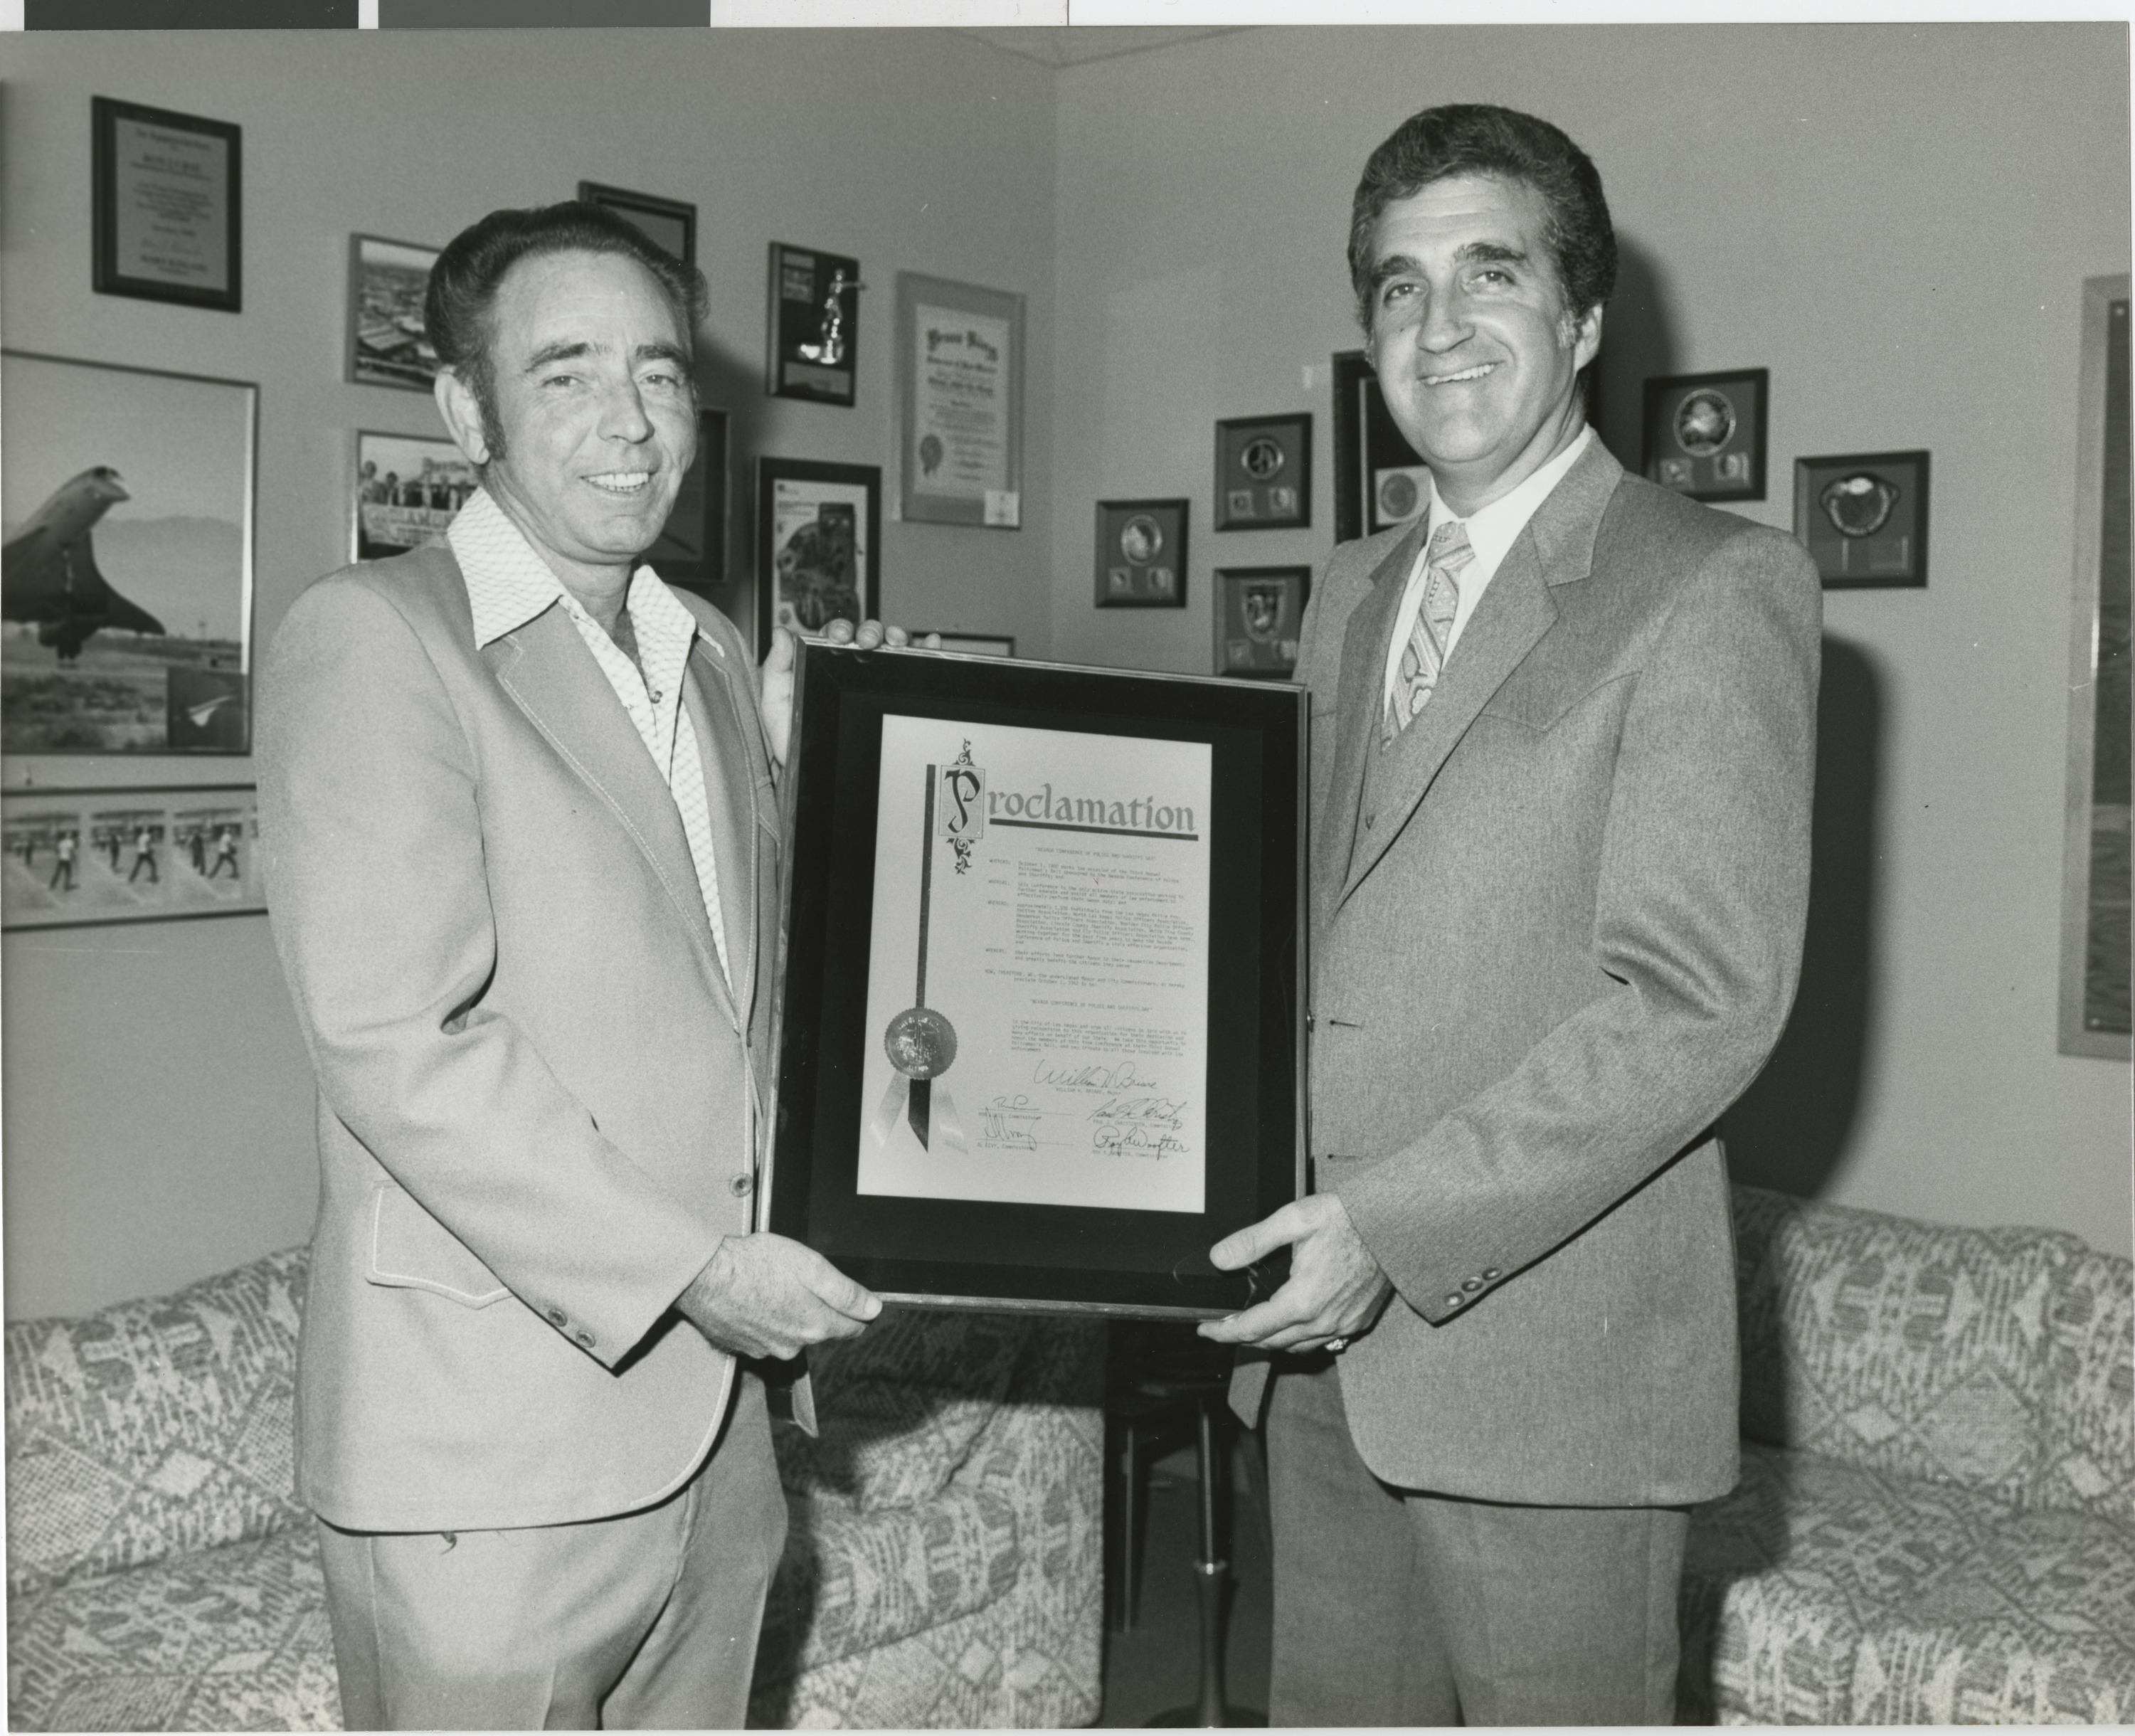 Photograph of Ron Lurie presenting a proclamation to O.C. Lee, October 1, 1982